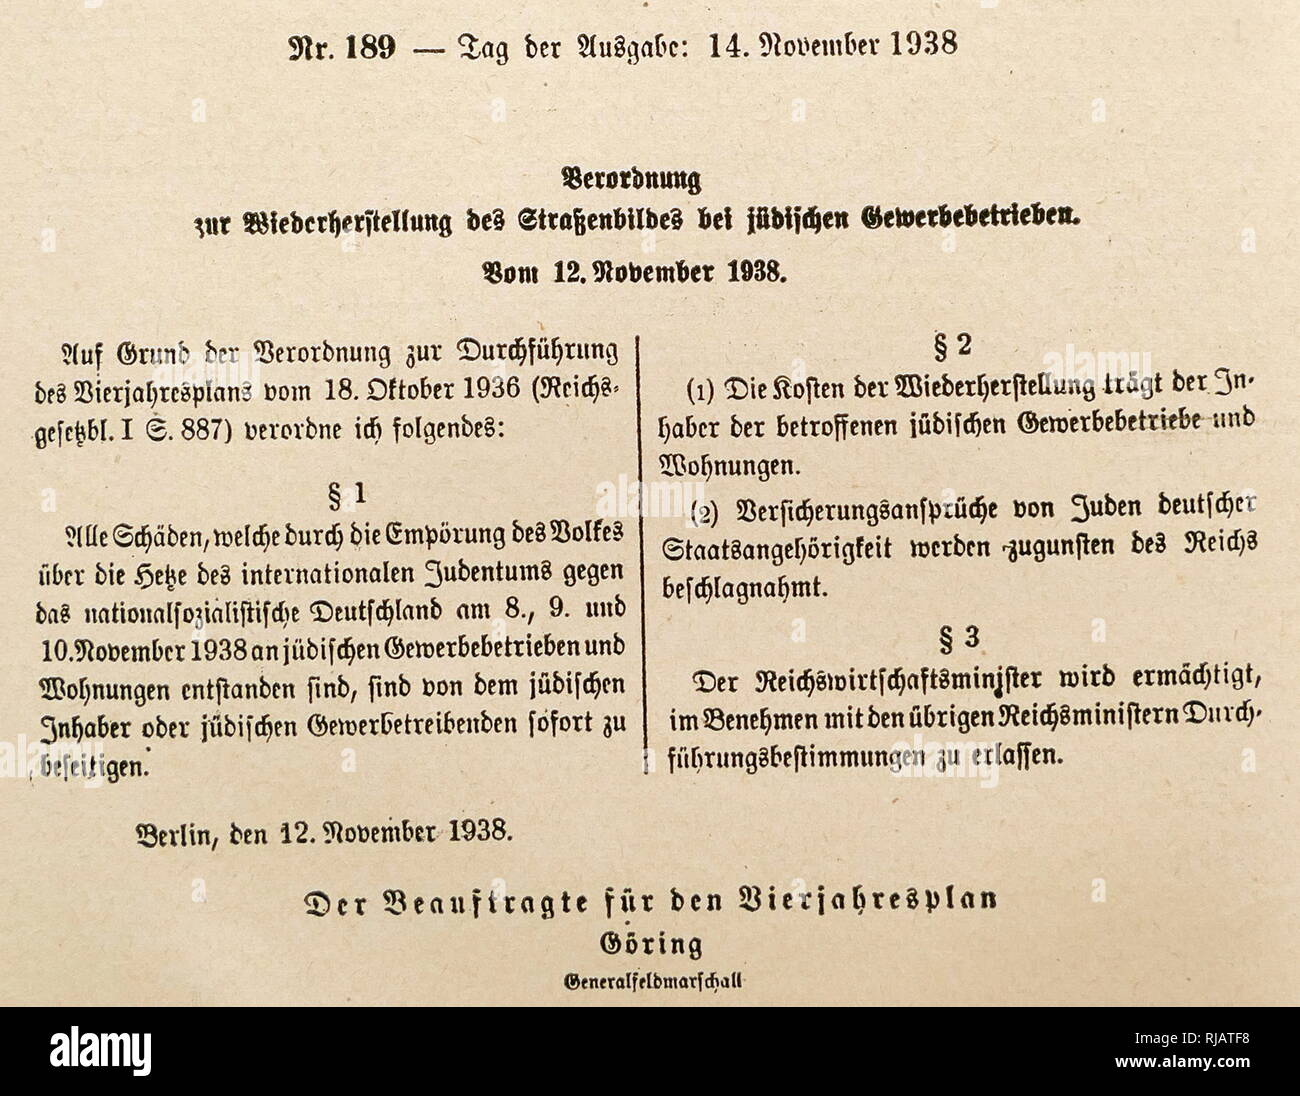 Nazi era, German Government announcement, by Hermann Goring after Kristallnacht November 1938. All damage caused to Jewish enterprises or dwellings on November 8, 9, and IO, 1938, by the 'wrath of the people, regarding the agitation of international Jewry against National Socialist Germany”, must be repaired immediately by their Jewish owners, at their own expense. Indemnities due to Jews from insurance companies are confiscated by the Reich. Stock Photo